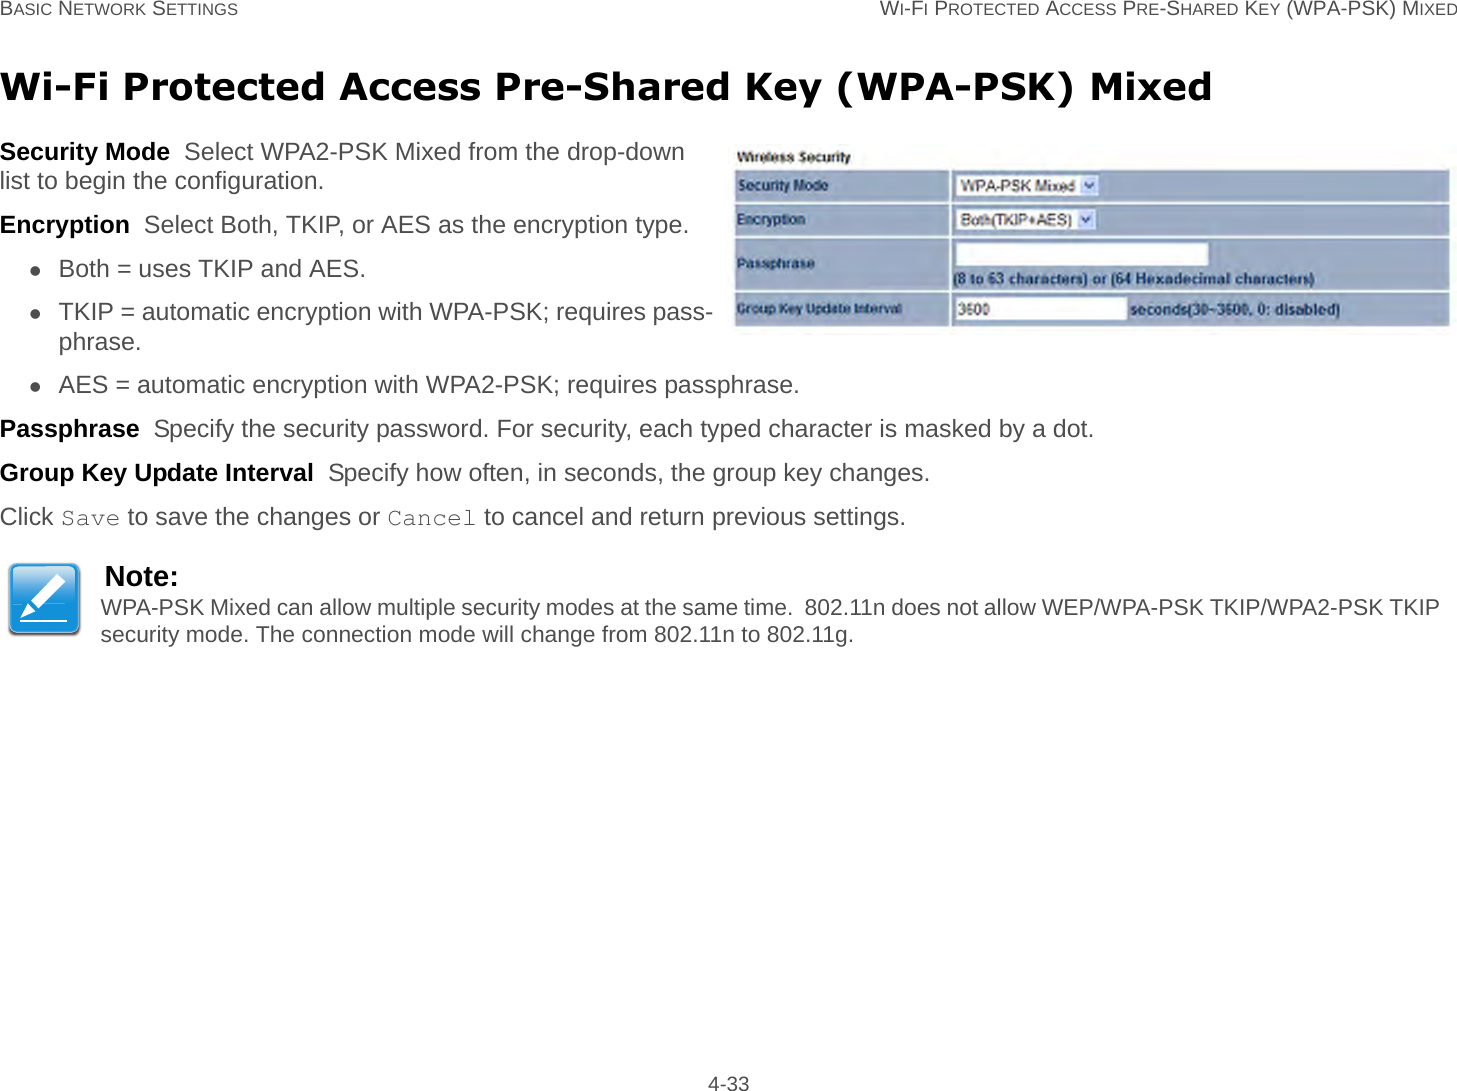 BASIC NETWORK SETTINGS WI-FI PROTECTED ACCESS PRE-SHARED KEY (WPA-PSK) MIXED 4-33Wi-Fi Protected Access Pre-Shared Key (WPA-PSK) MixedSecurity Mode  Select WPA2-PSK Mixed from the drop-down list to begin the configuration.Encryption  Select Both, TKIP, or AES as the encryption type.Both = uses TKIP and AES.TKIP = automatic encryption with WPA-PSK; requires pass-phrase.AES = automatic encryption with WPA2-PSK; requires passphrase.Passphrase  Specify the security password. For security, each typed character is masked by a dot.Group Key Update Interval  Specify how often, in seconds, the group key changes.Click Save to save the changes or Cancel to cancel and return previous settings.Note:WPA-PSK Mixed can allow multiple security modes at the same time.  802.11n does not allow WEP/WPA-PSK TKIP/WPA2-PSK TKIP security mode. The connection mode will change from 802.11n to 802.11g.